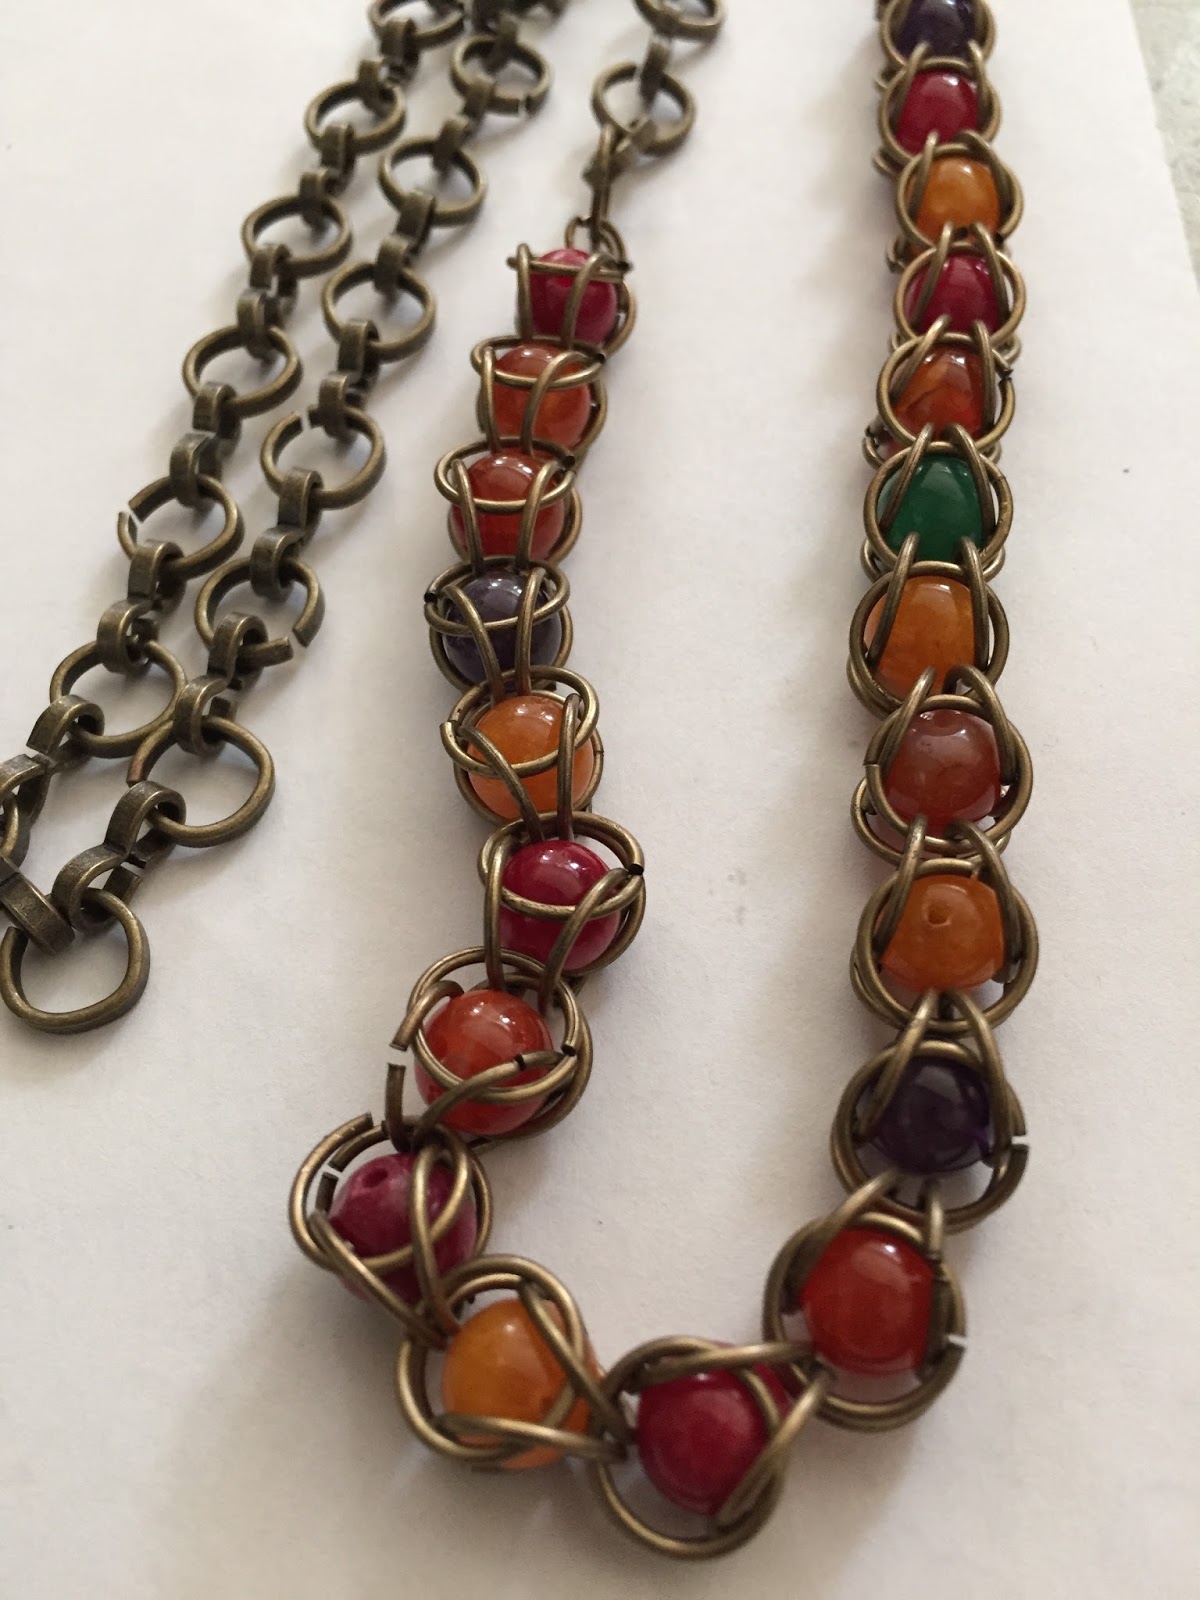 Chuck Does Art: DIY Jewelry: Captured ('Caged') Bead Chains